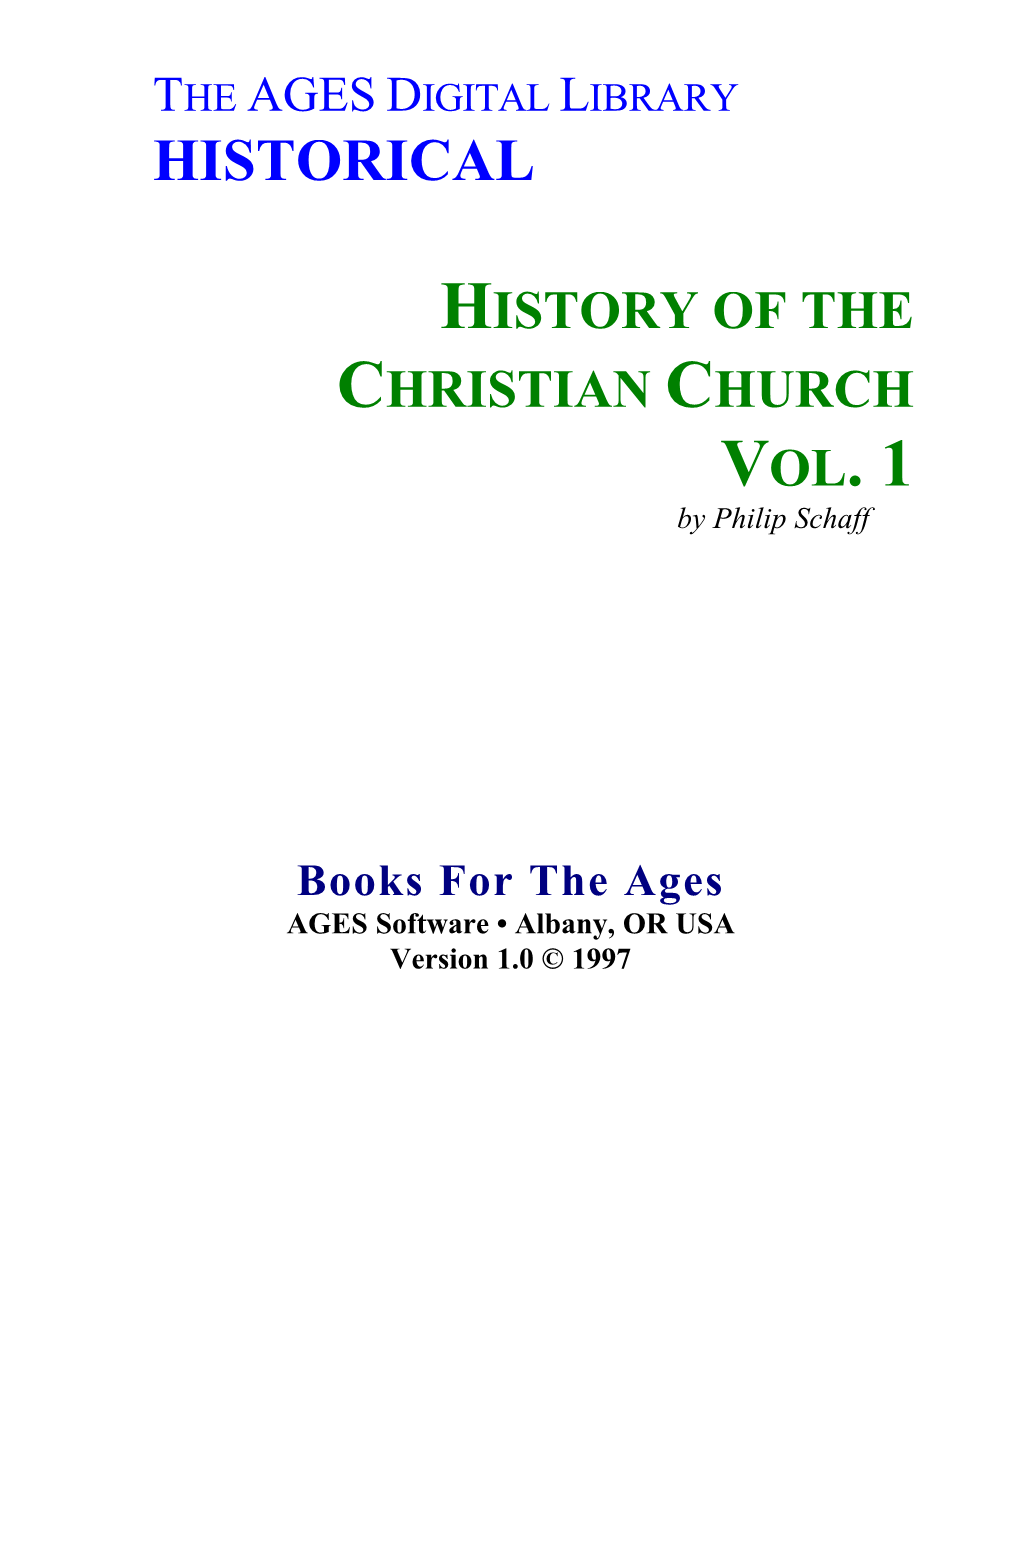 HISTORY of the CHRISTIAN CHURCH VOL. 1 by Philip Schaff